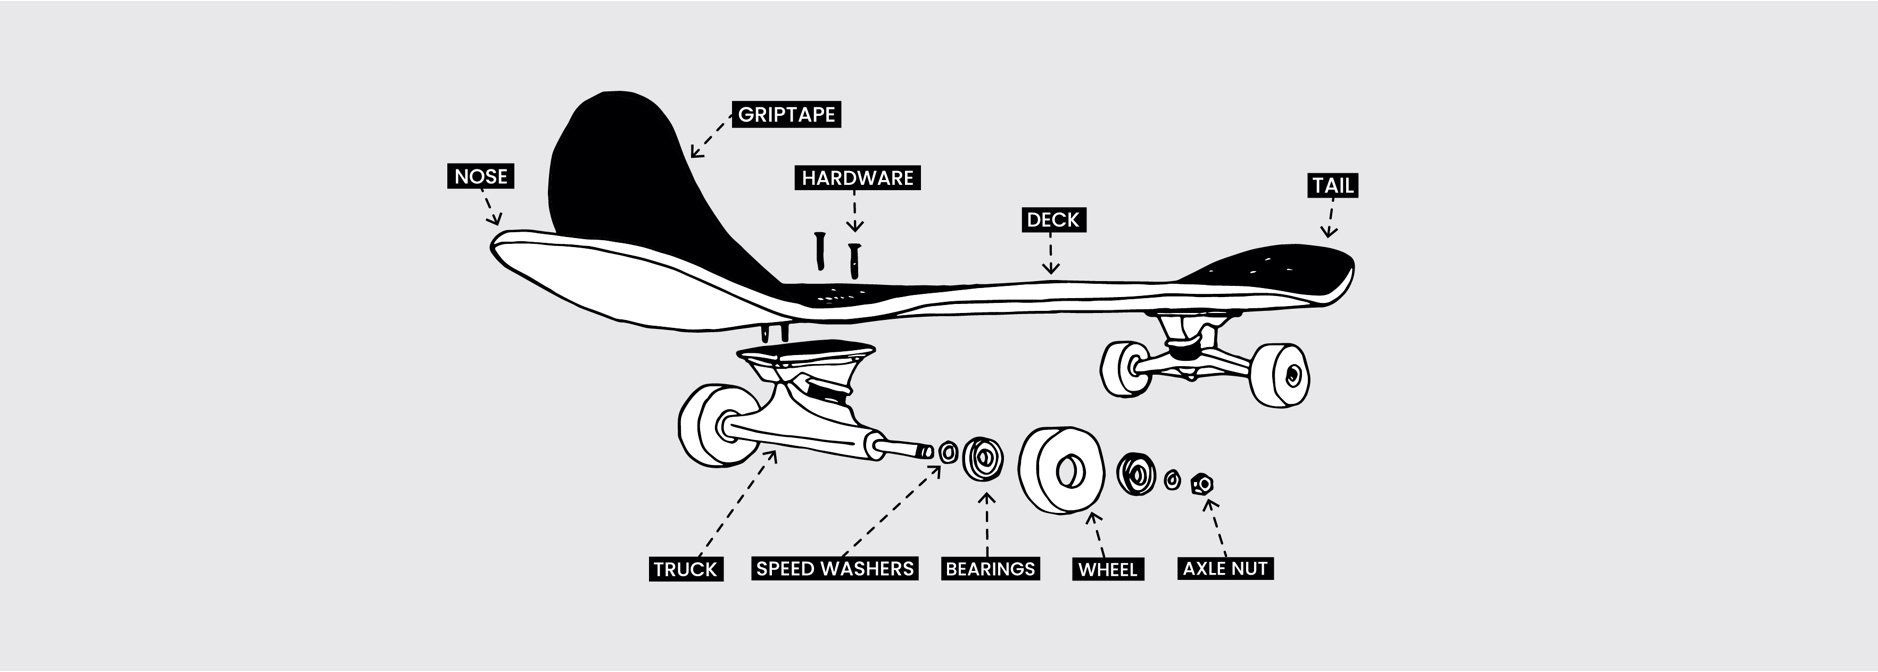 How To Build A Complete Skateboard KCDC